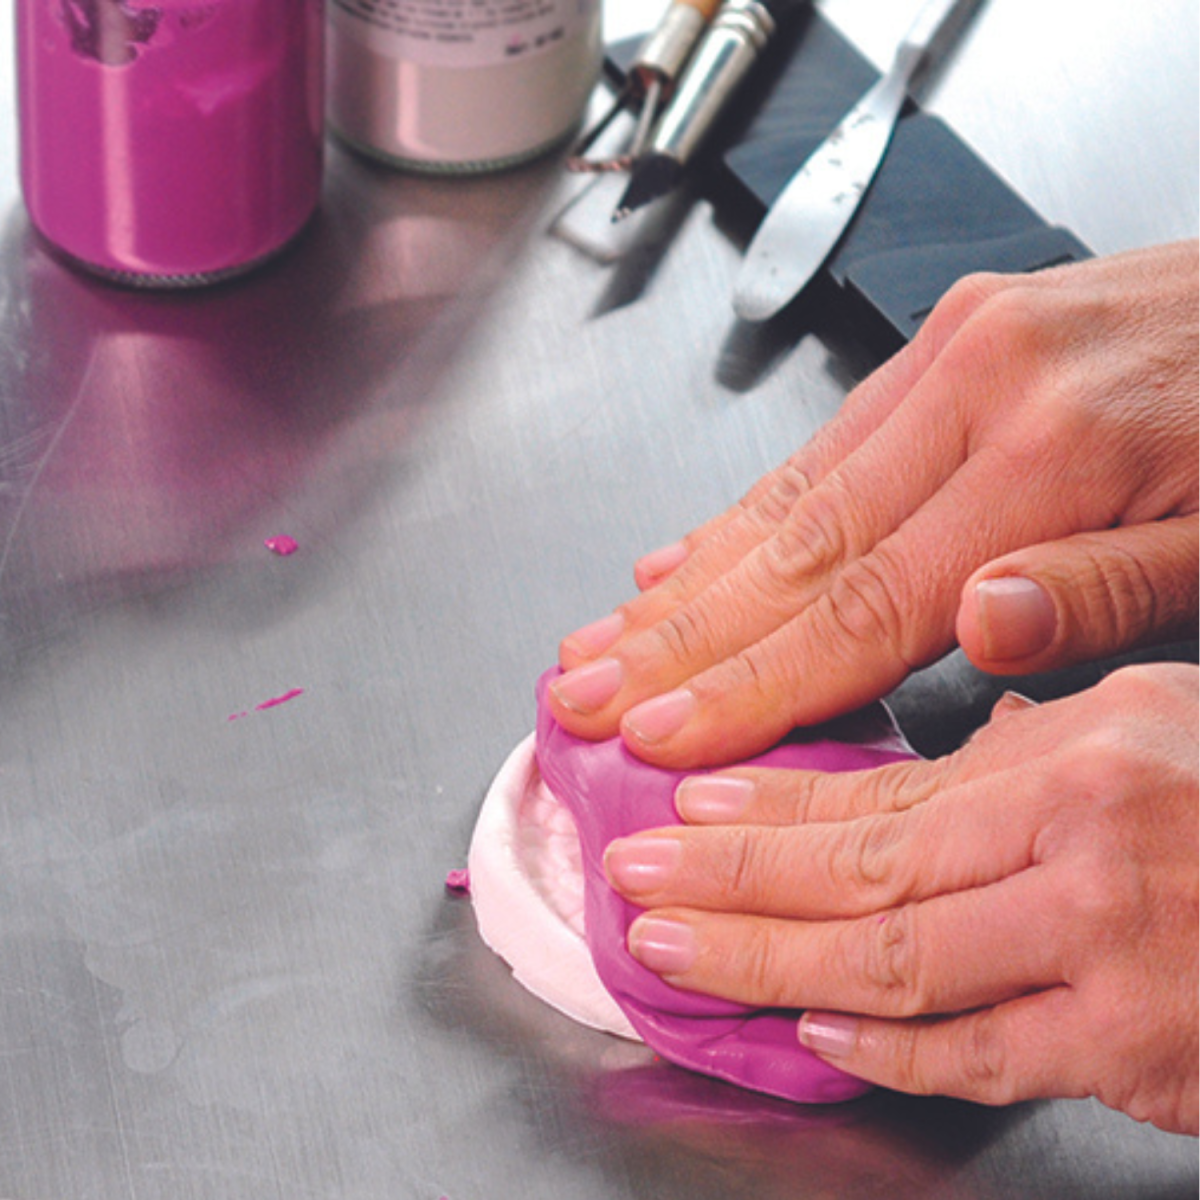 Pinkysil Putty Silicone Rubber